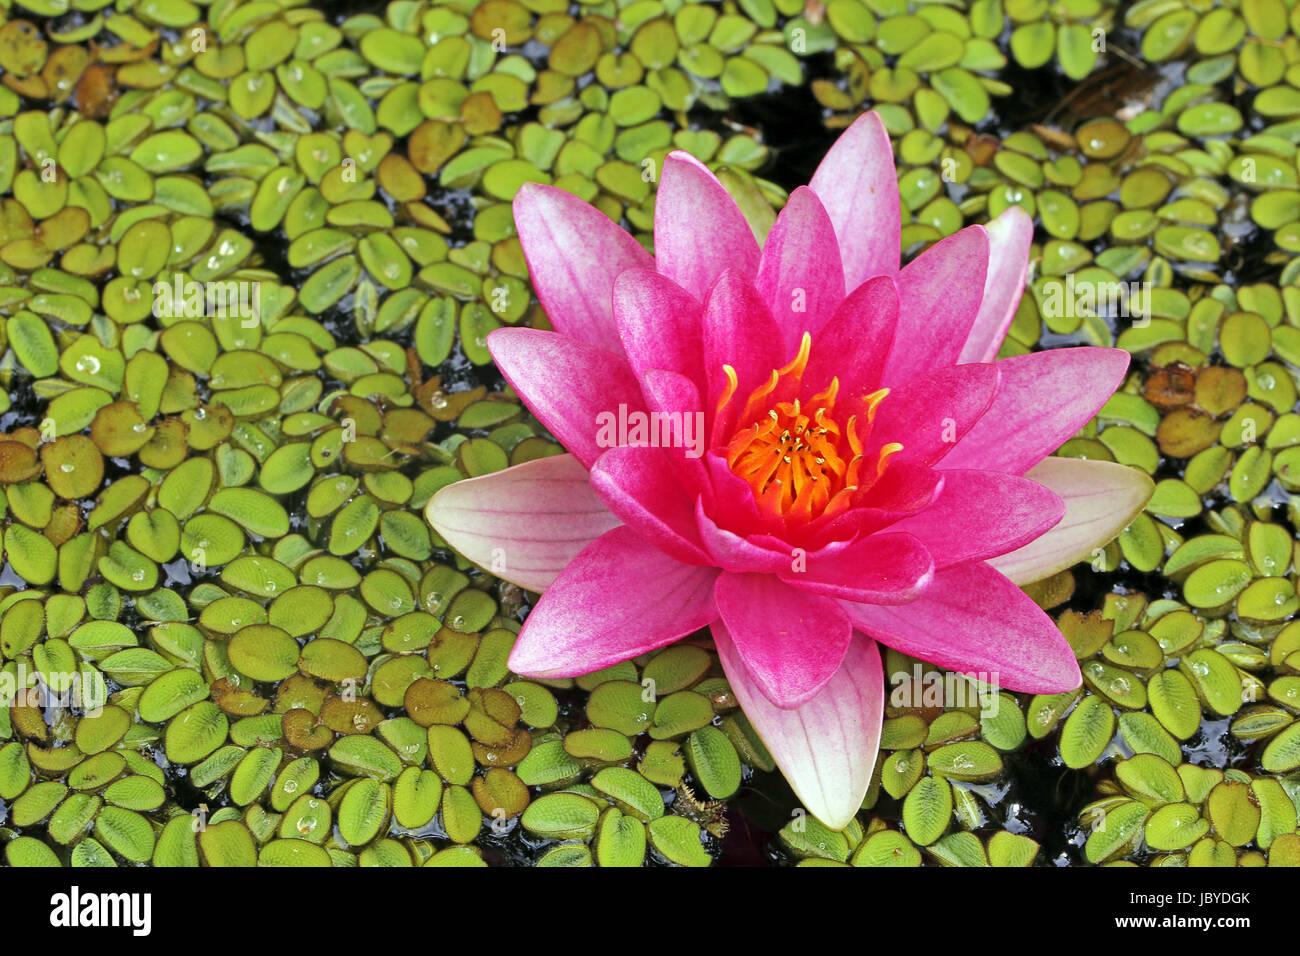 pink water lily with swimming fern Stock Photo